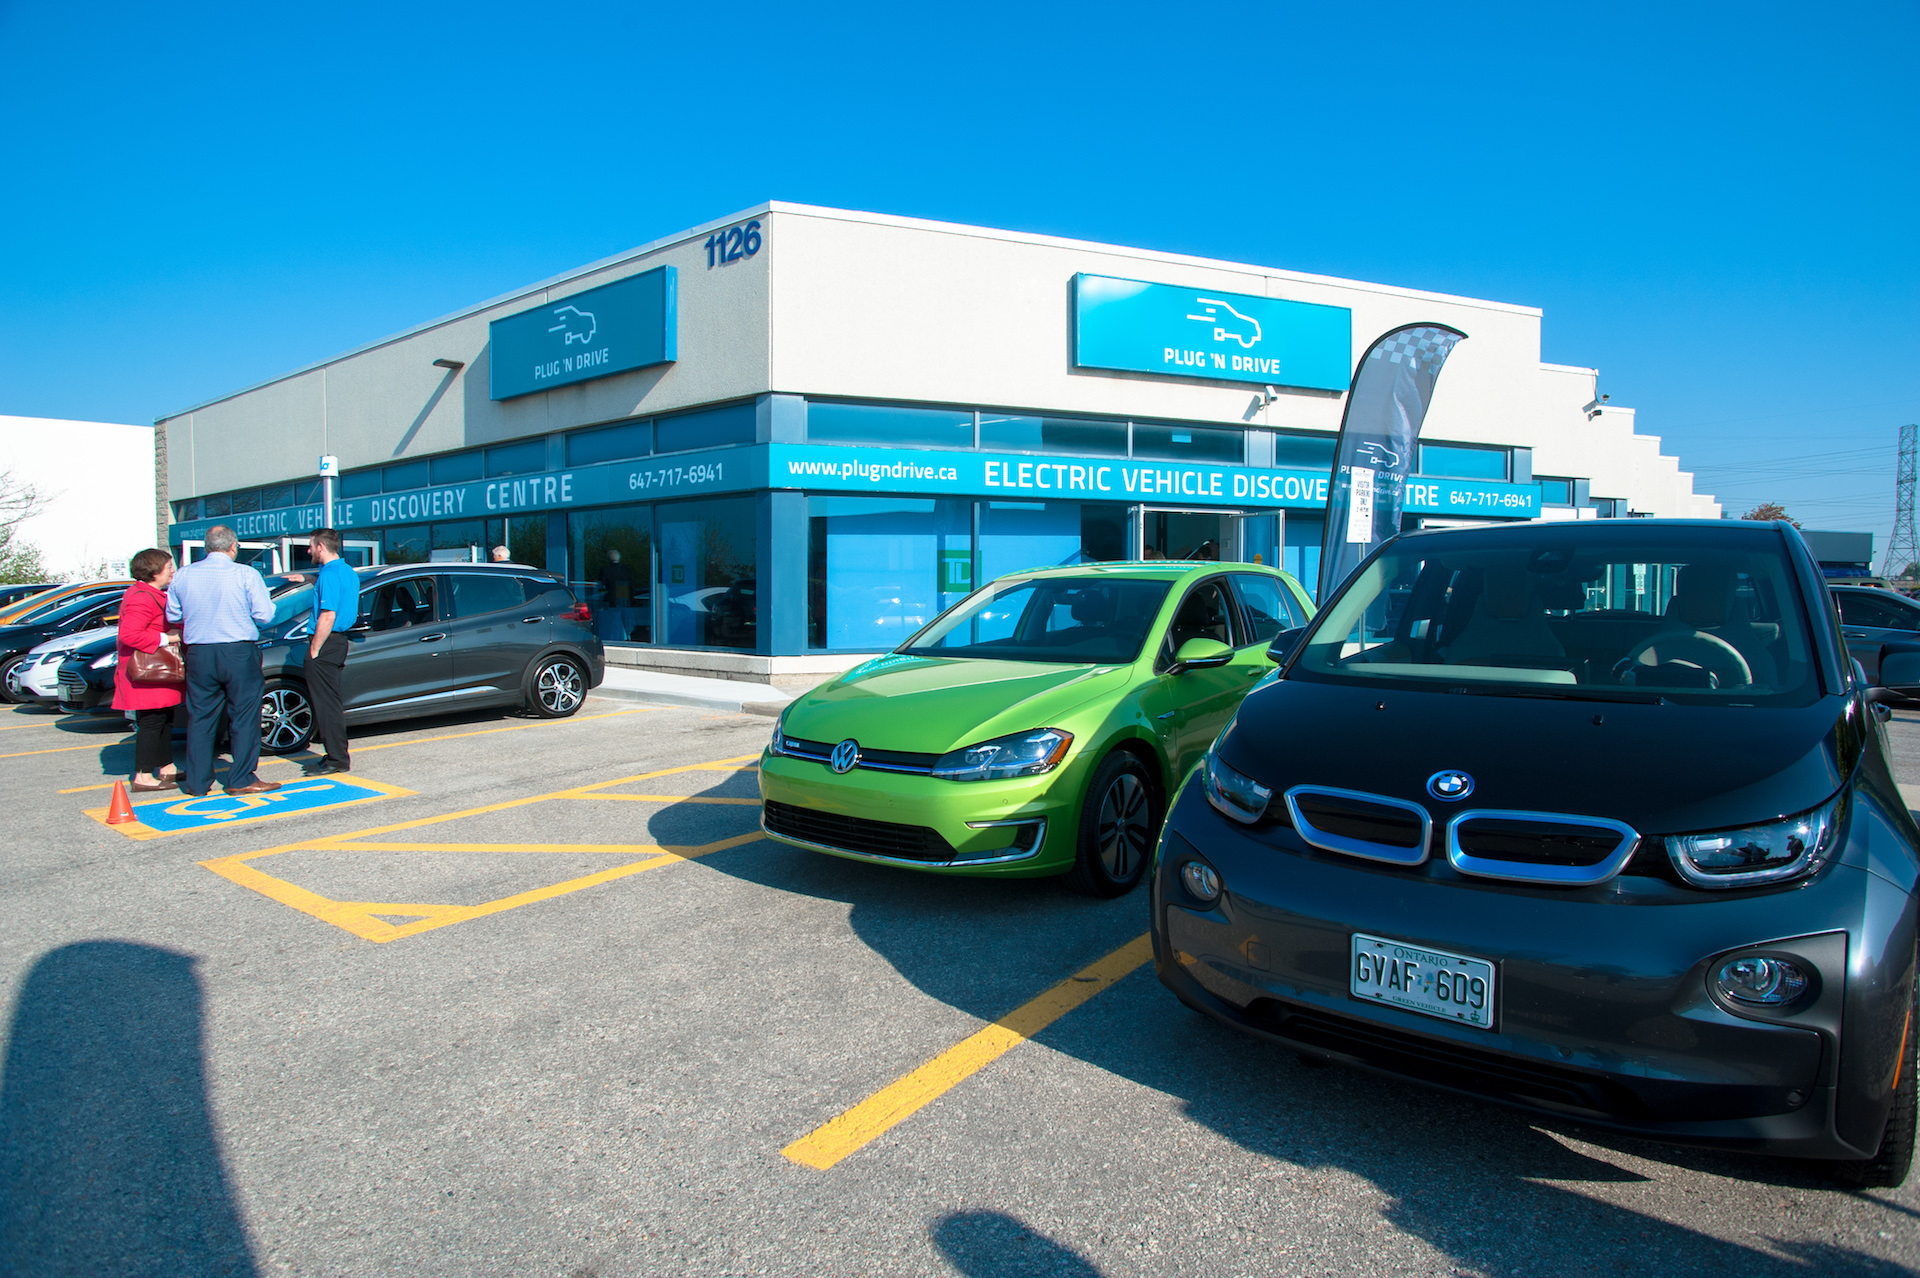 Electriccar discovery, education centers are now a thing